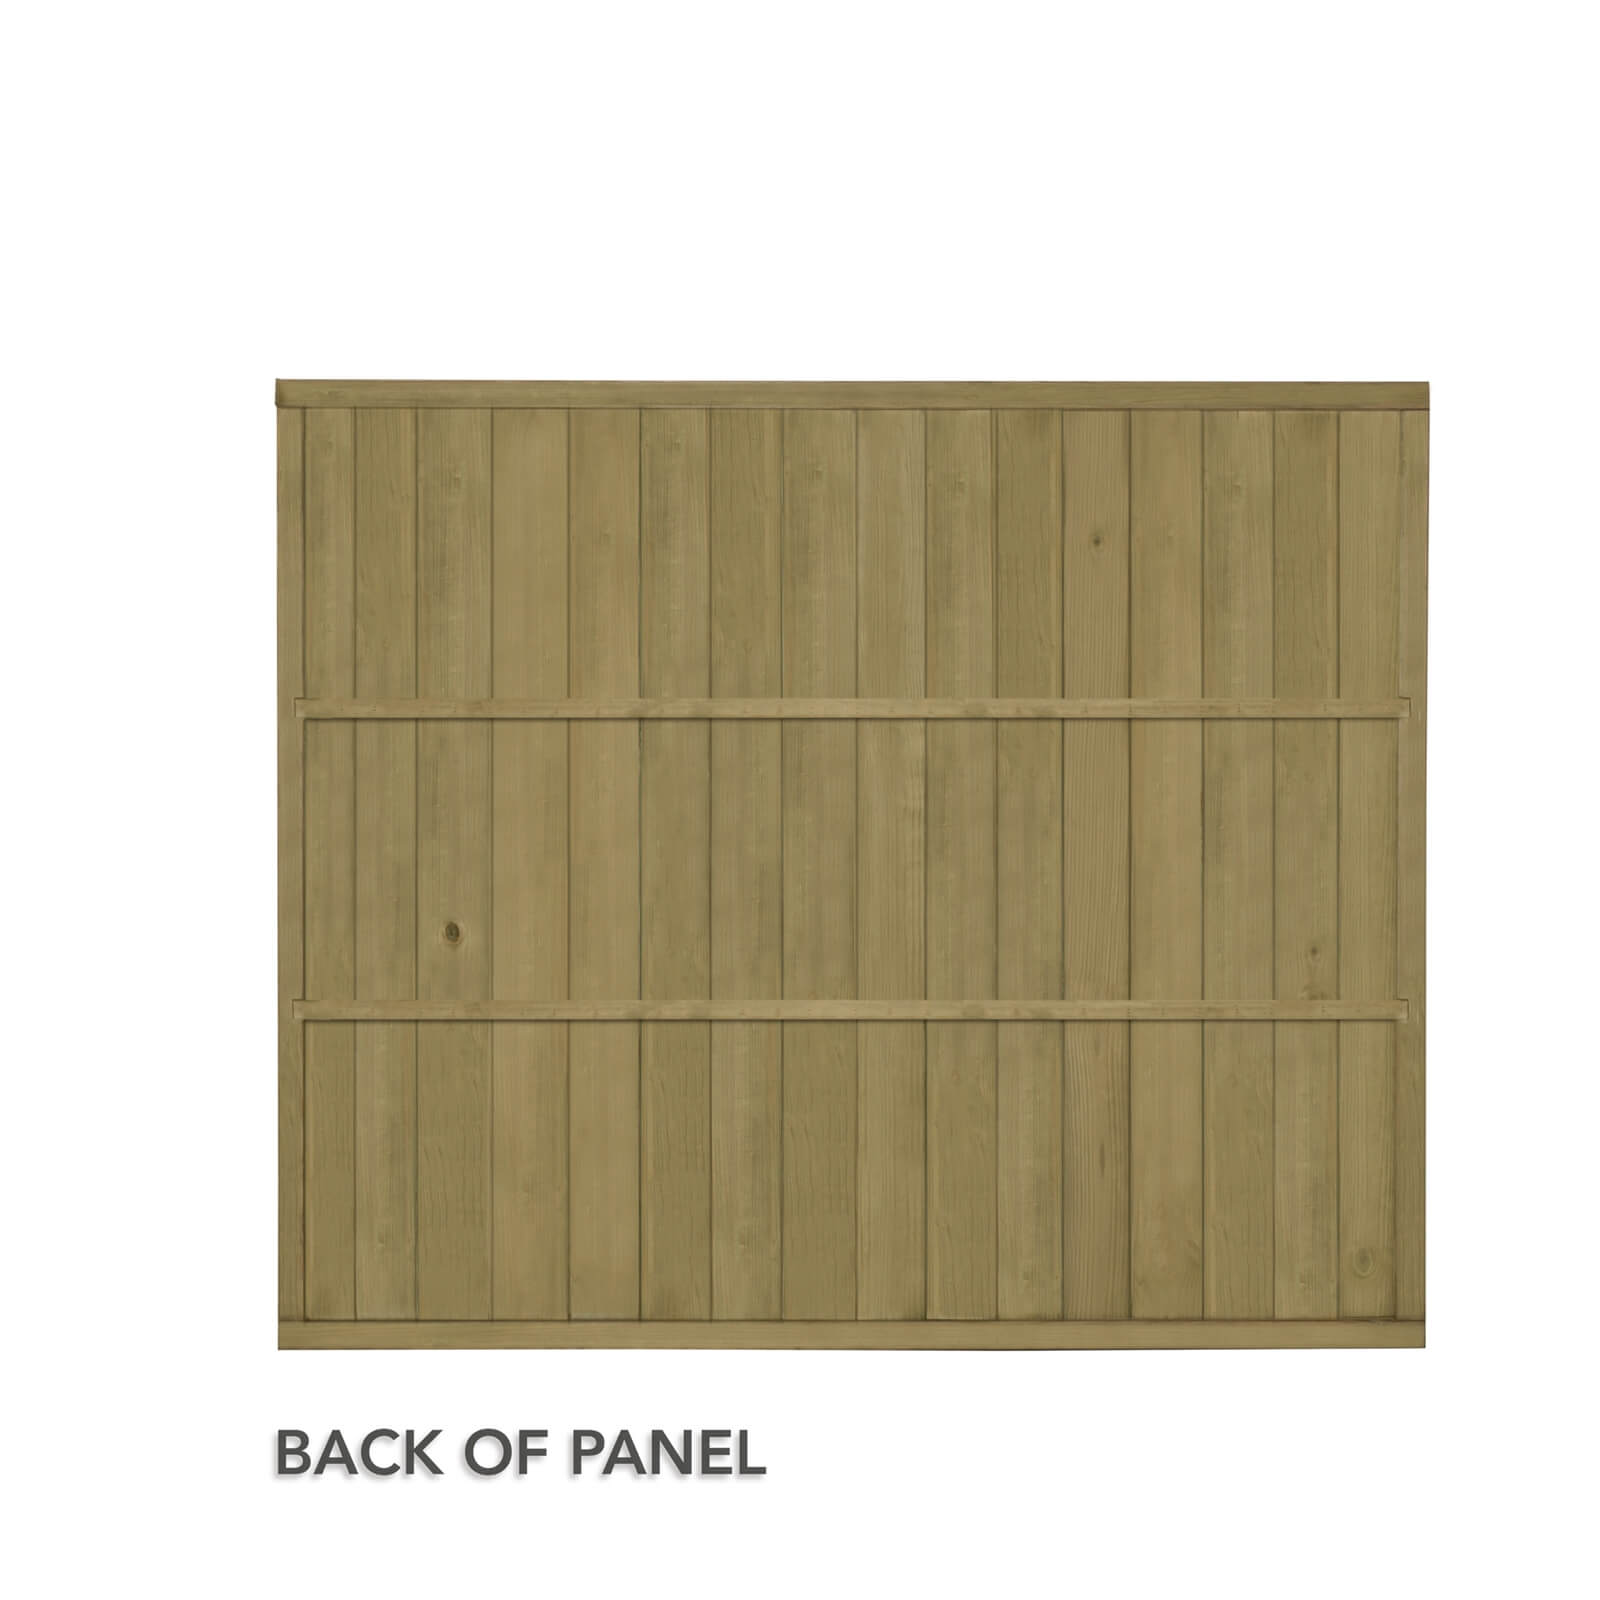 Forest Vertical Tongue & Groove Fence Panel - 5ft - Pack of 3